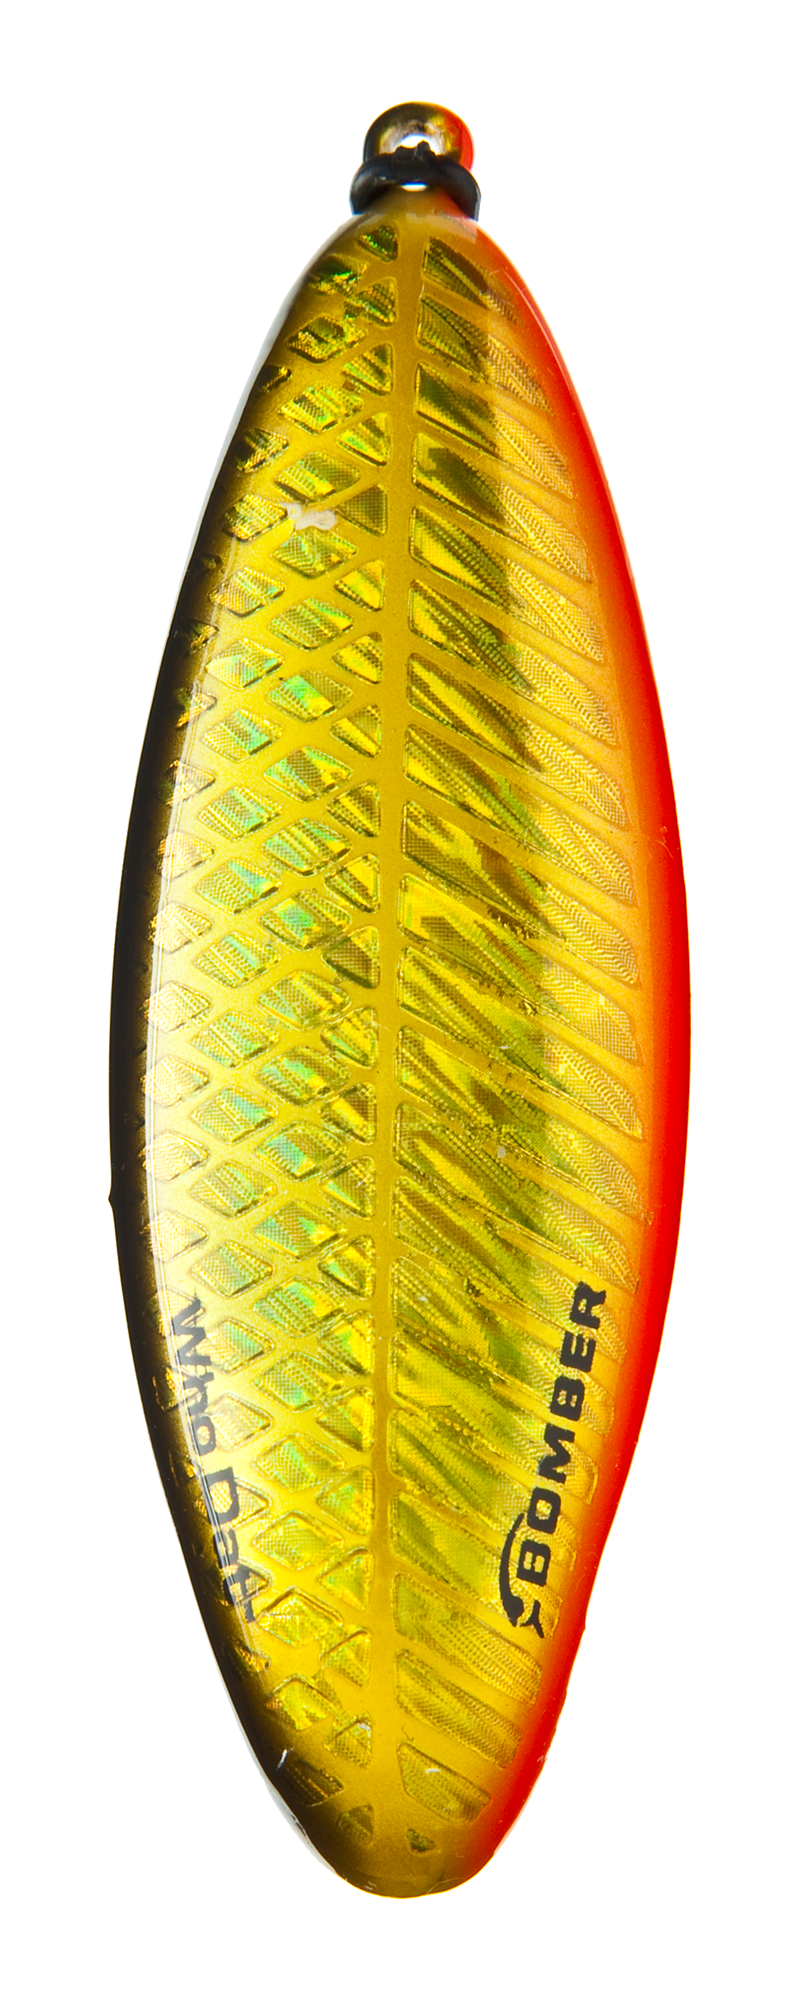 Bomber Saltwater Grade Who Dat Weedless Rattling Spoon Fishing Lure - Gold  Black Orange, 2 5/8, 7/8 oz, Spoons -  Canada